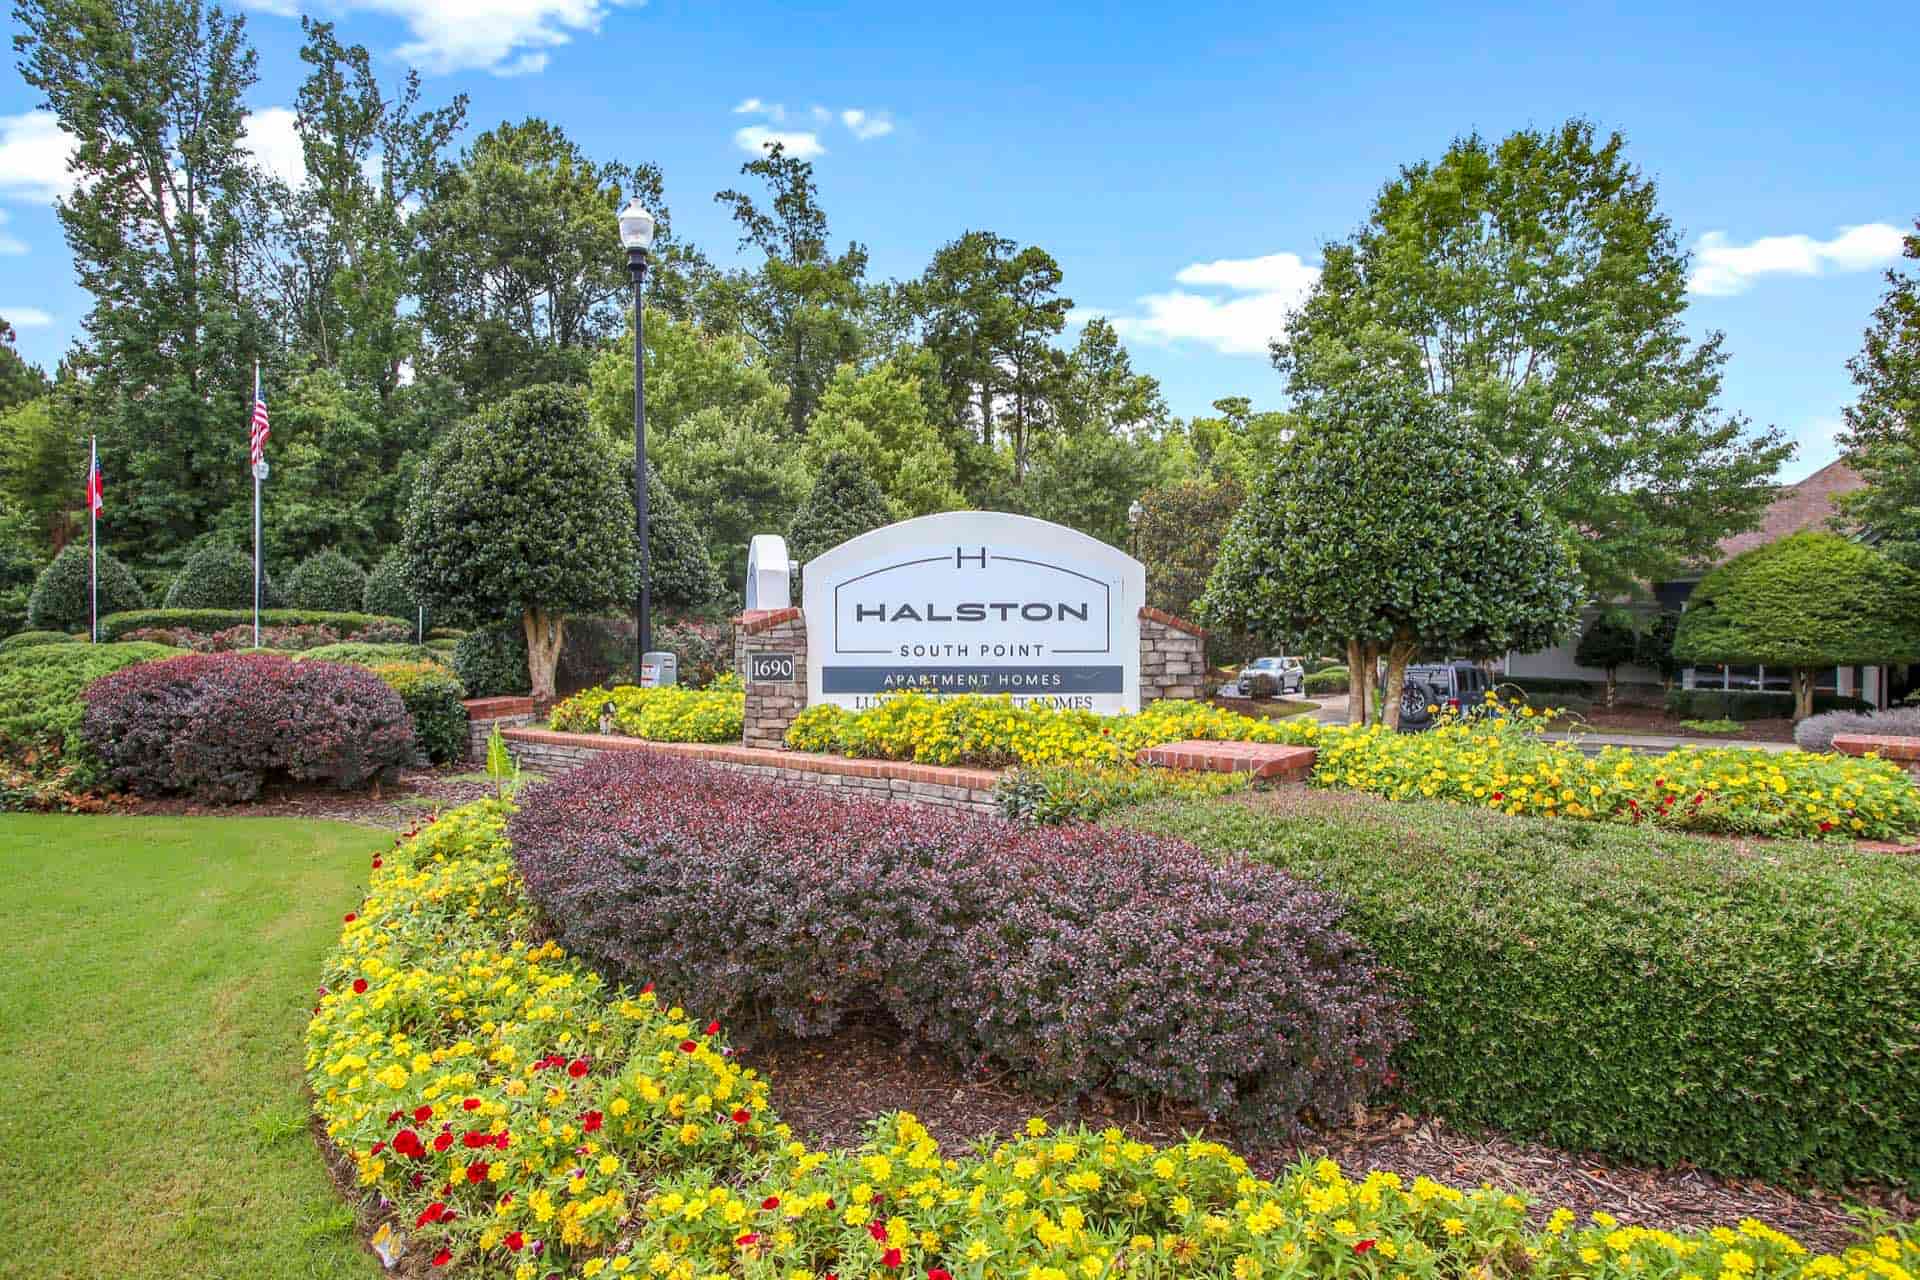 Halston South Point apartment homes sign in bush and flower bed